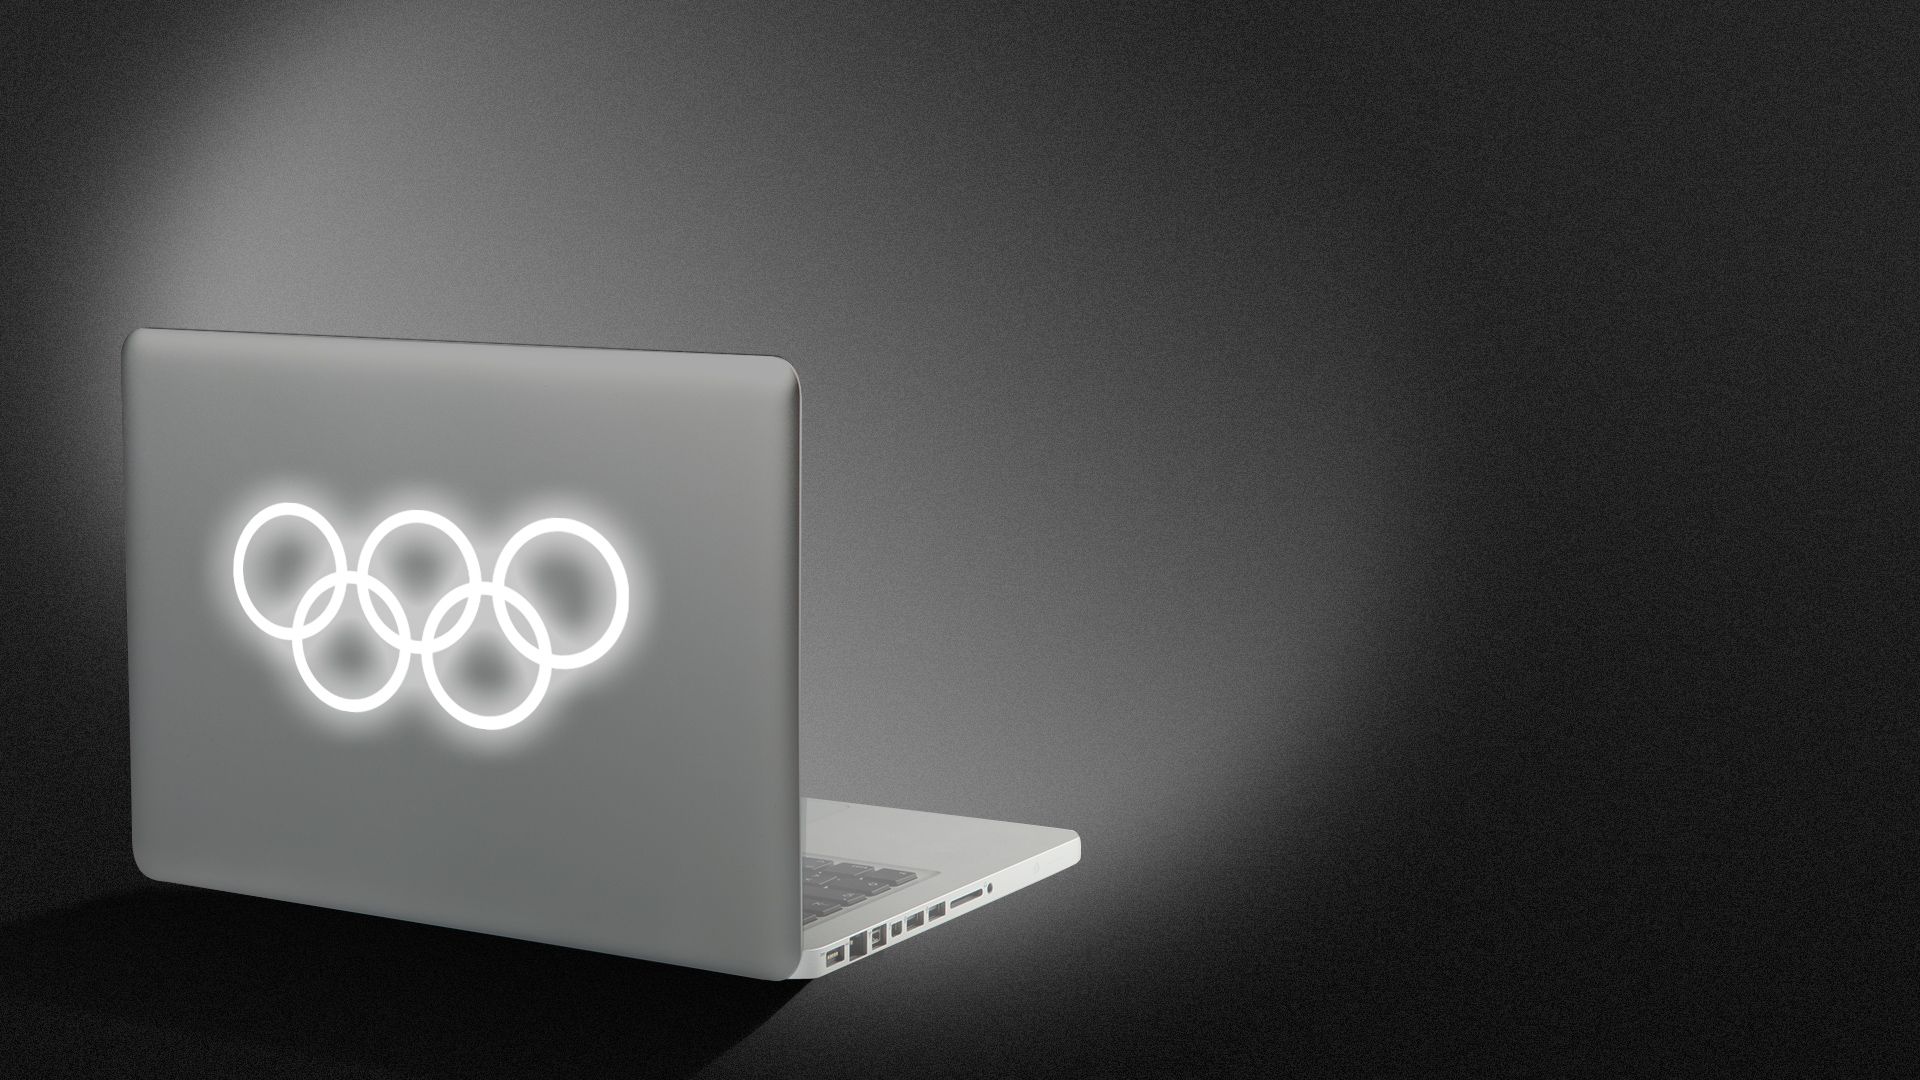 Illustration of the back of an opened laptop with the Olympic symbol as the glowing logo